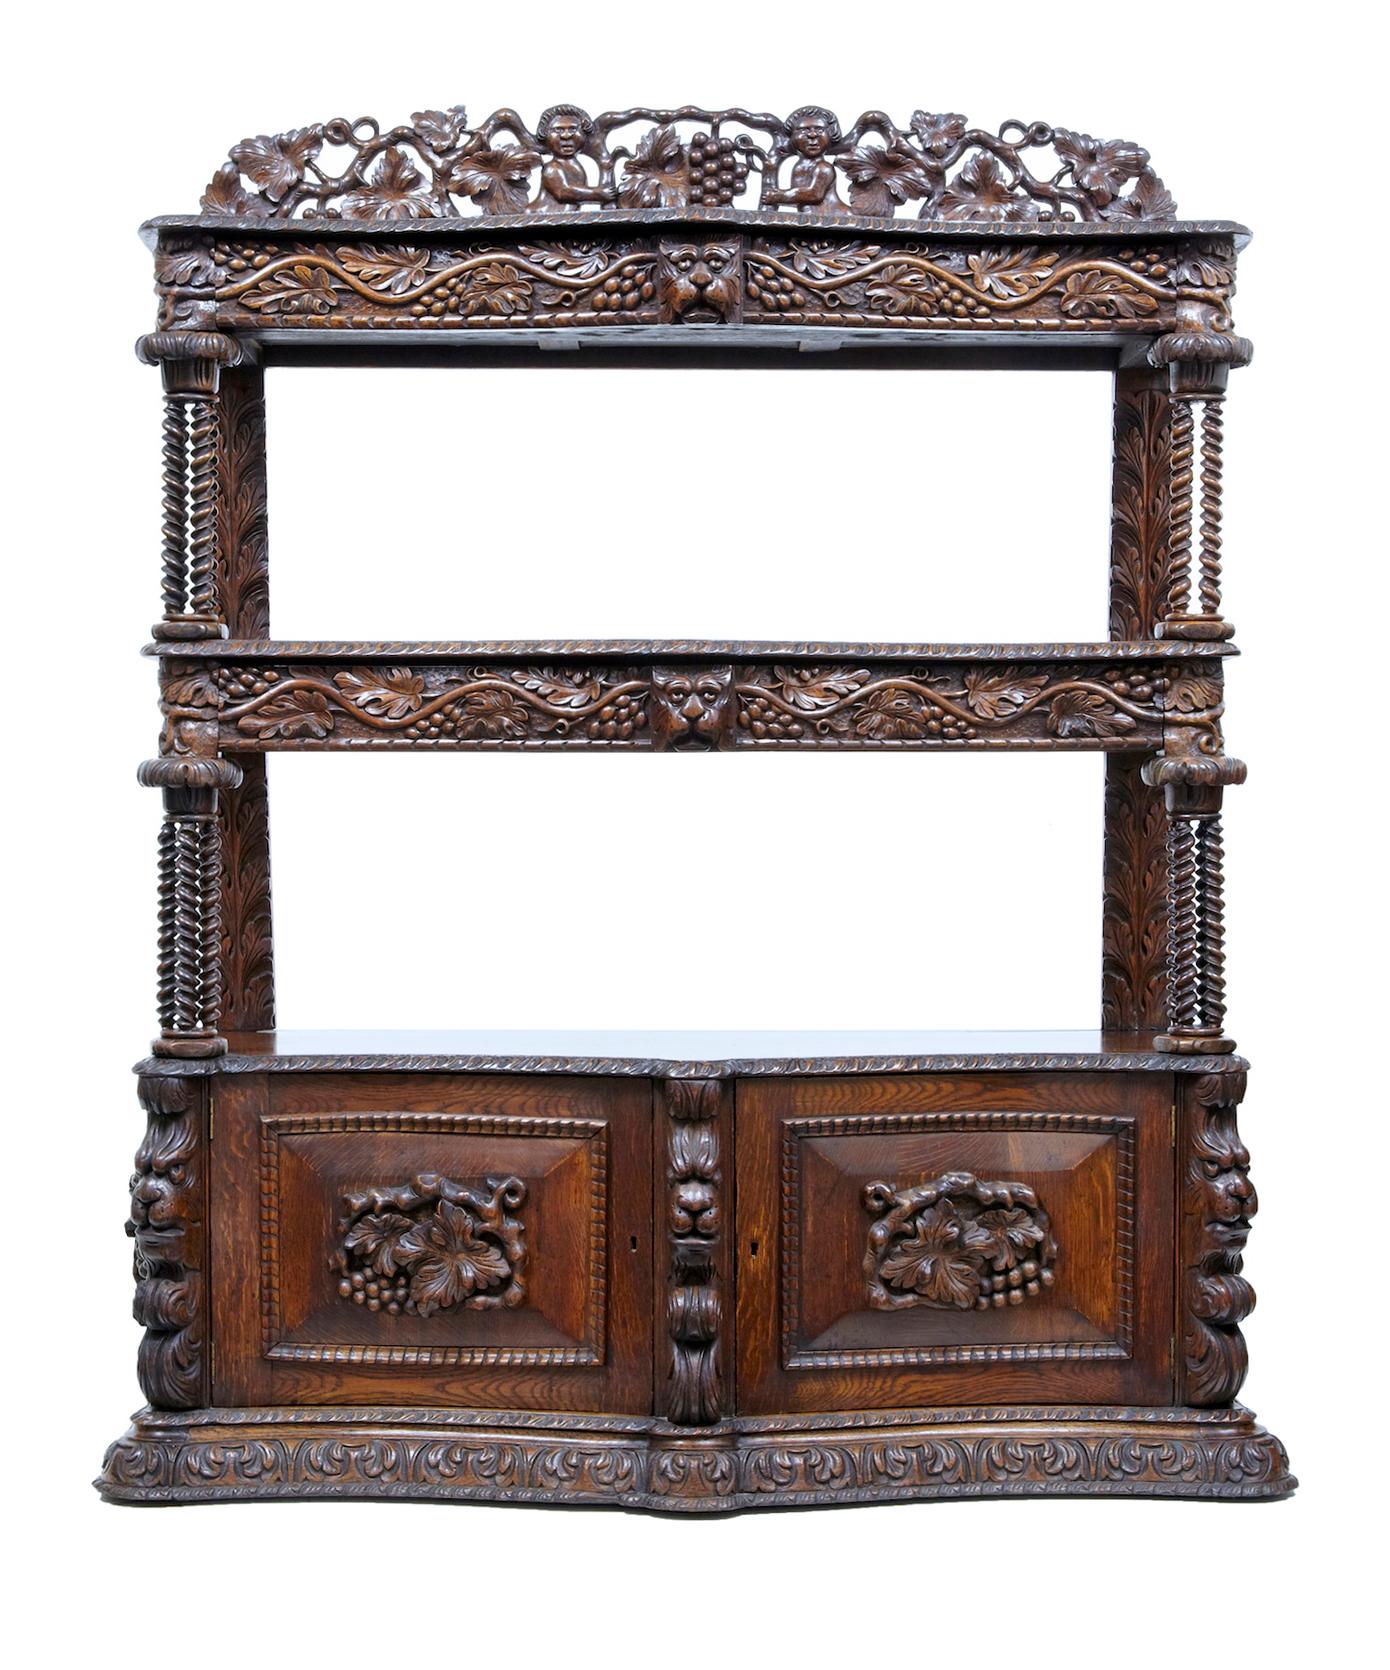 19th century profusely carved Victorian oak buffet, circa 1870.

Beautiful quality carved oak buffet, circa 1870. Comprising of 3 tiers, pierced carved gallery above and double door cupboard below. 1 drawer in the top 2 tiers, cupboard below opens